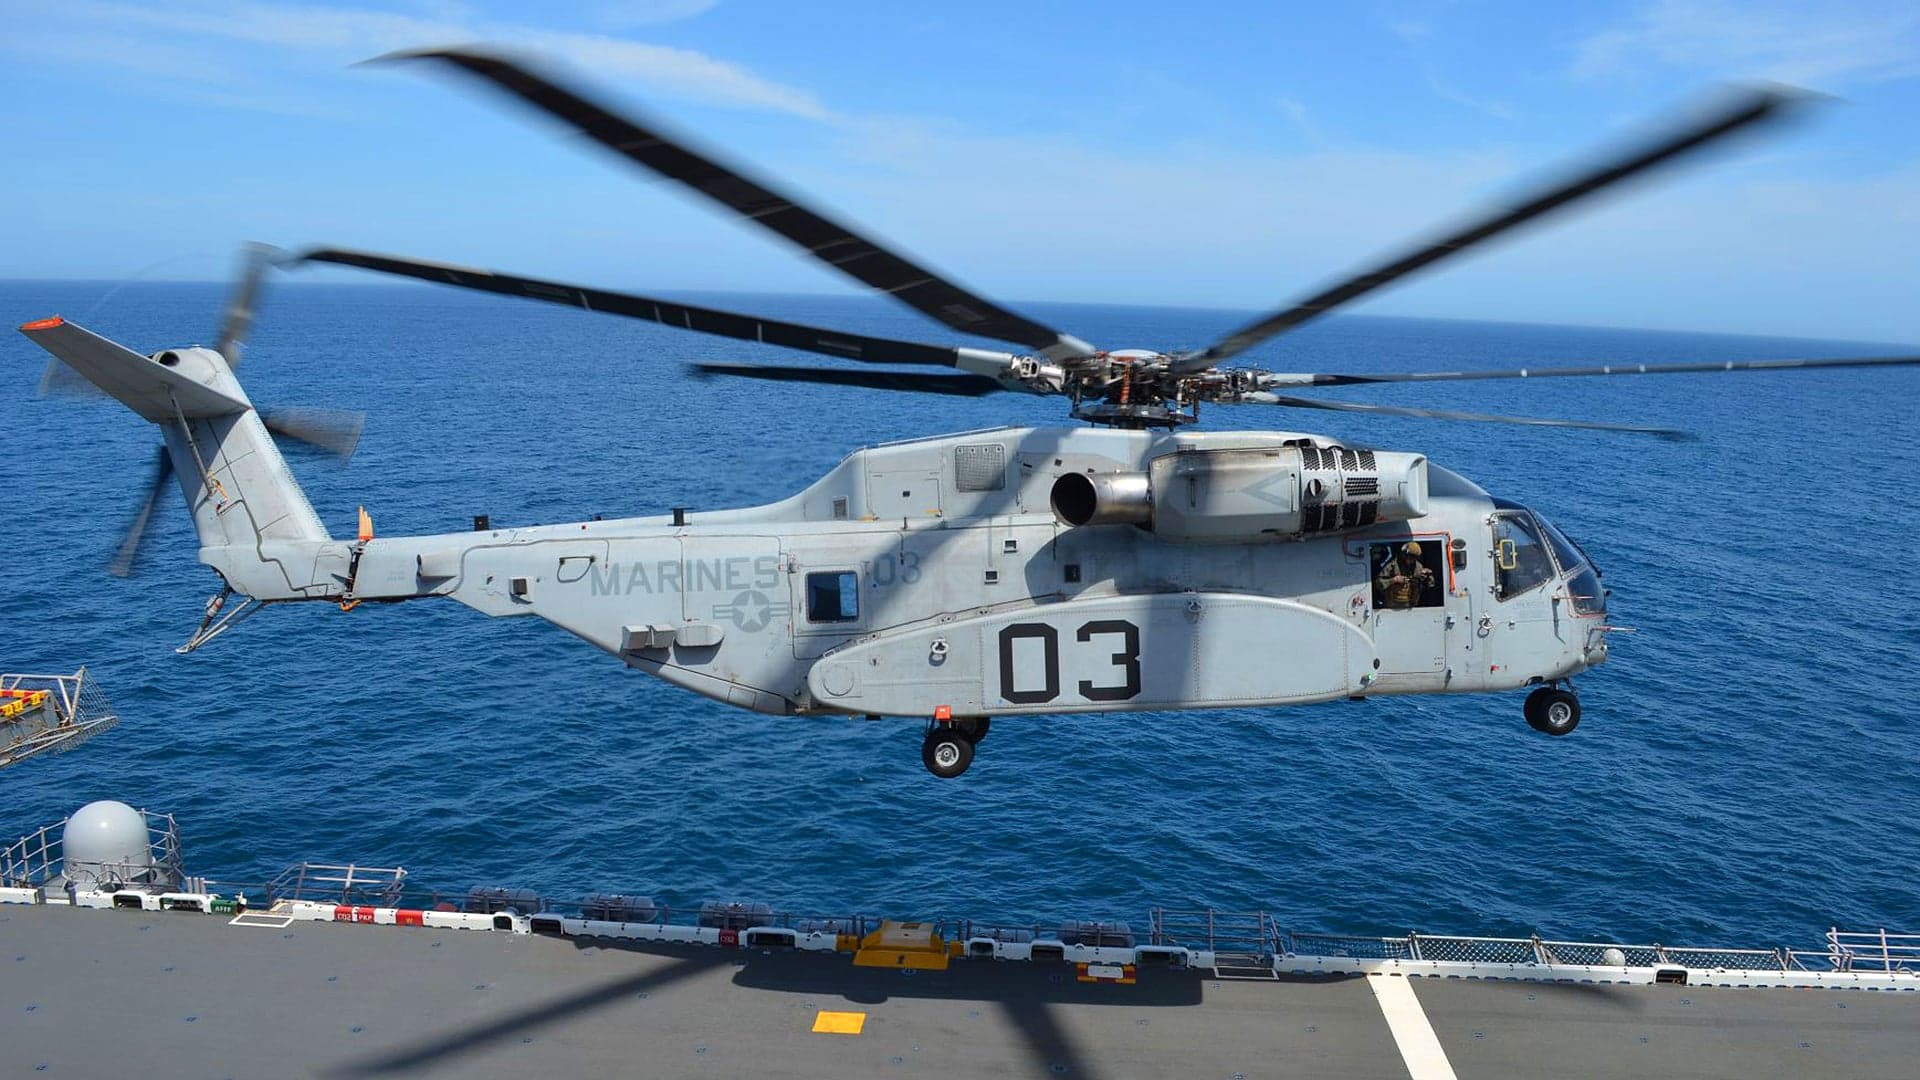 This Is Our First Look At The Marines’ New CH-53K King Stallion Flying From A Ship